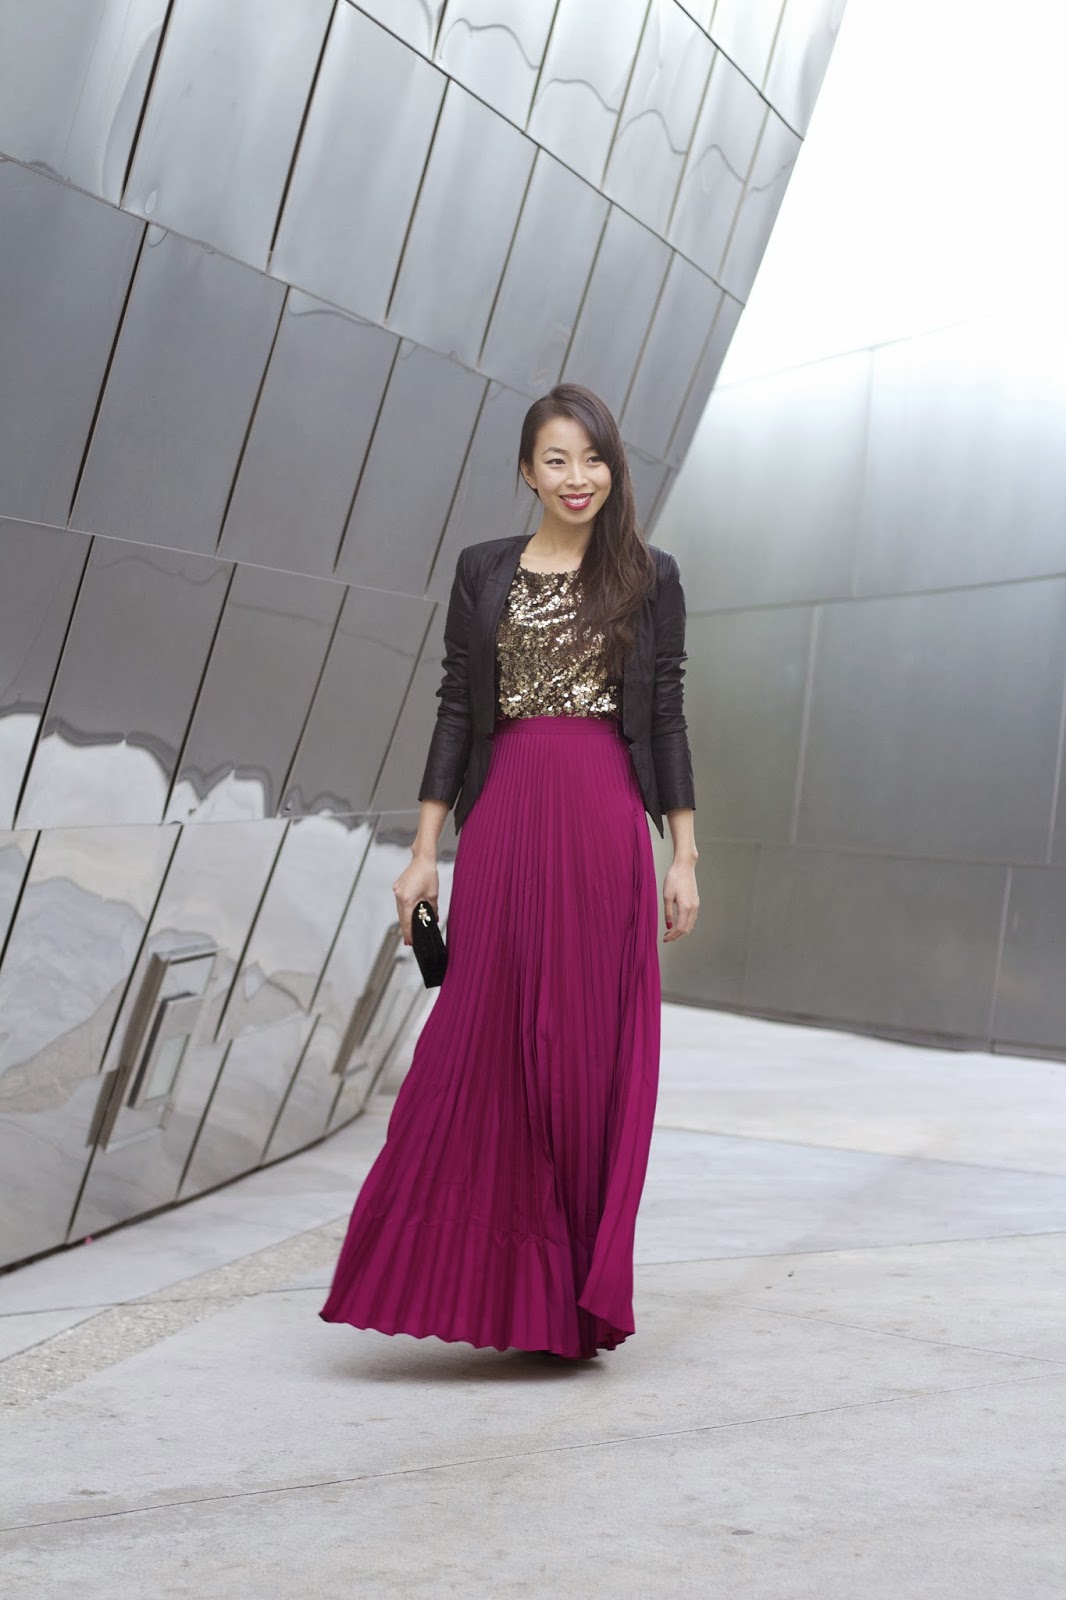 The model in black blazer with violet maxi skirt.